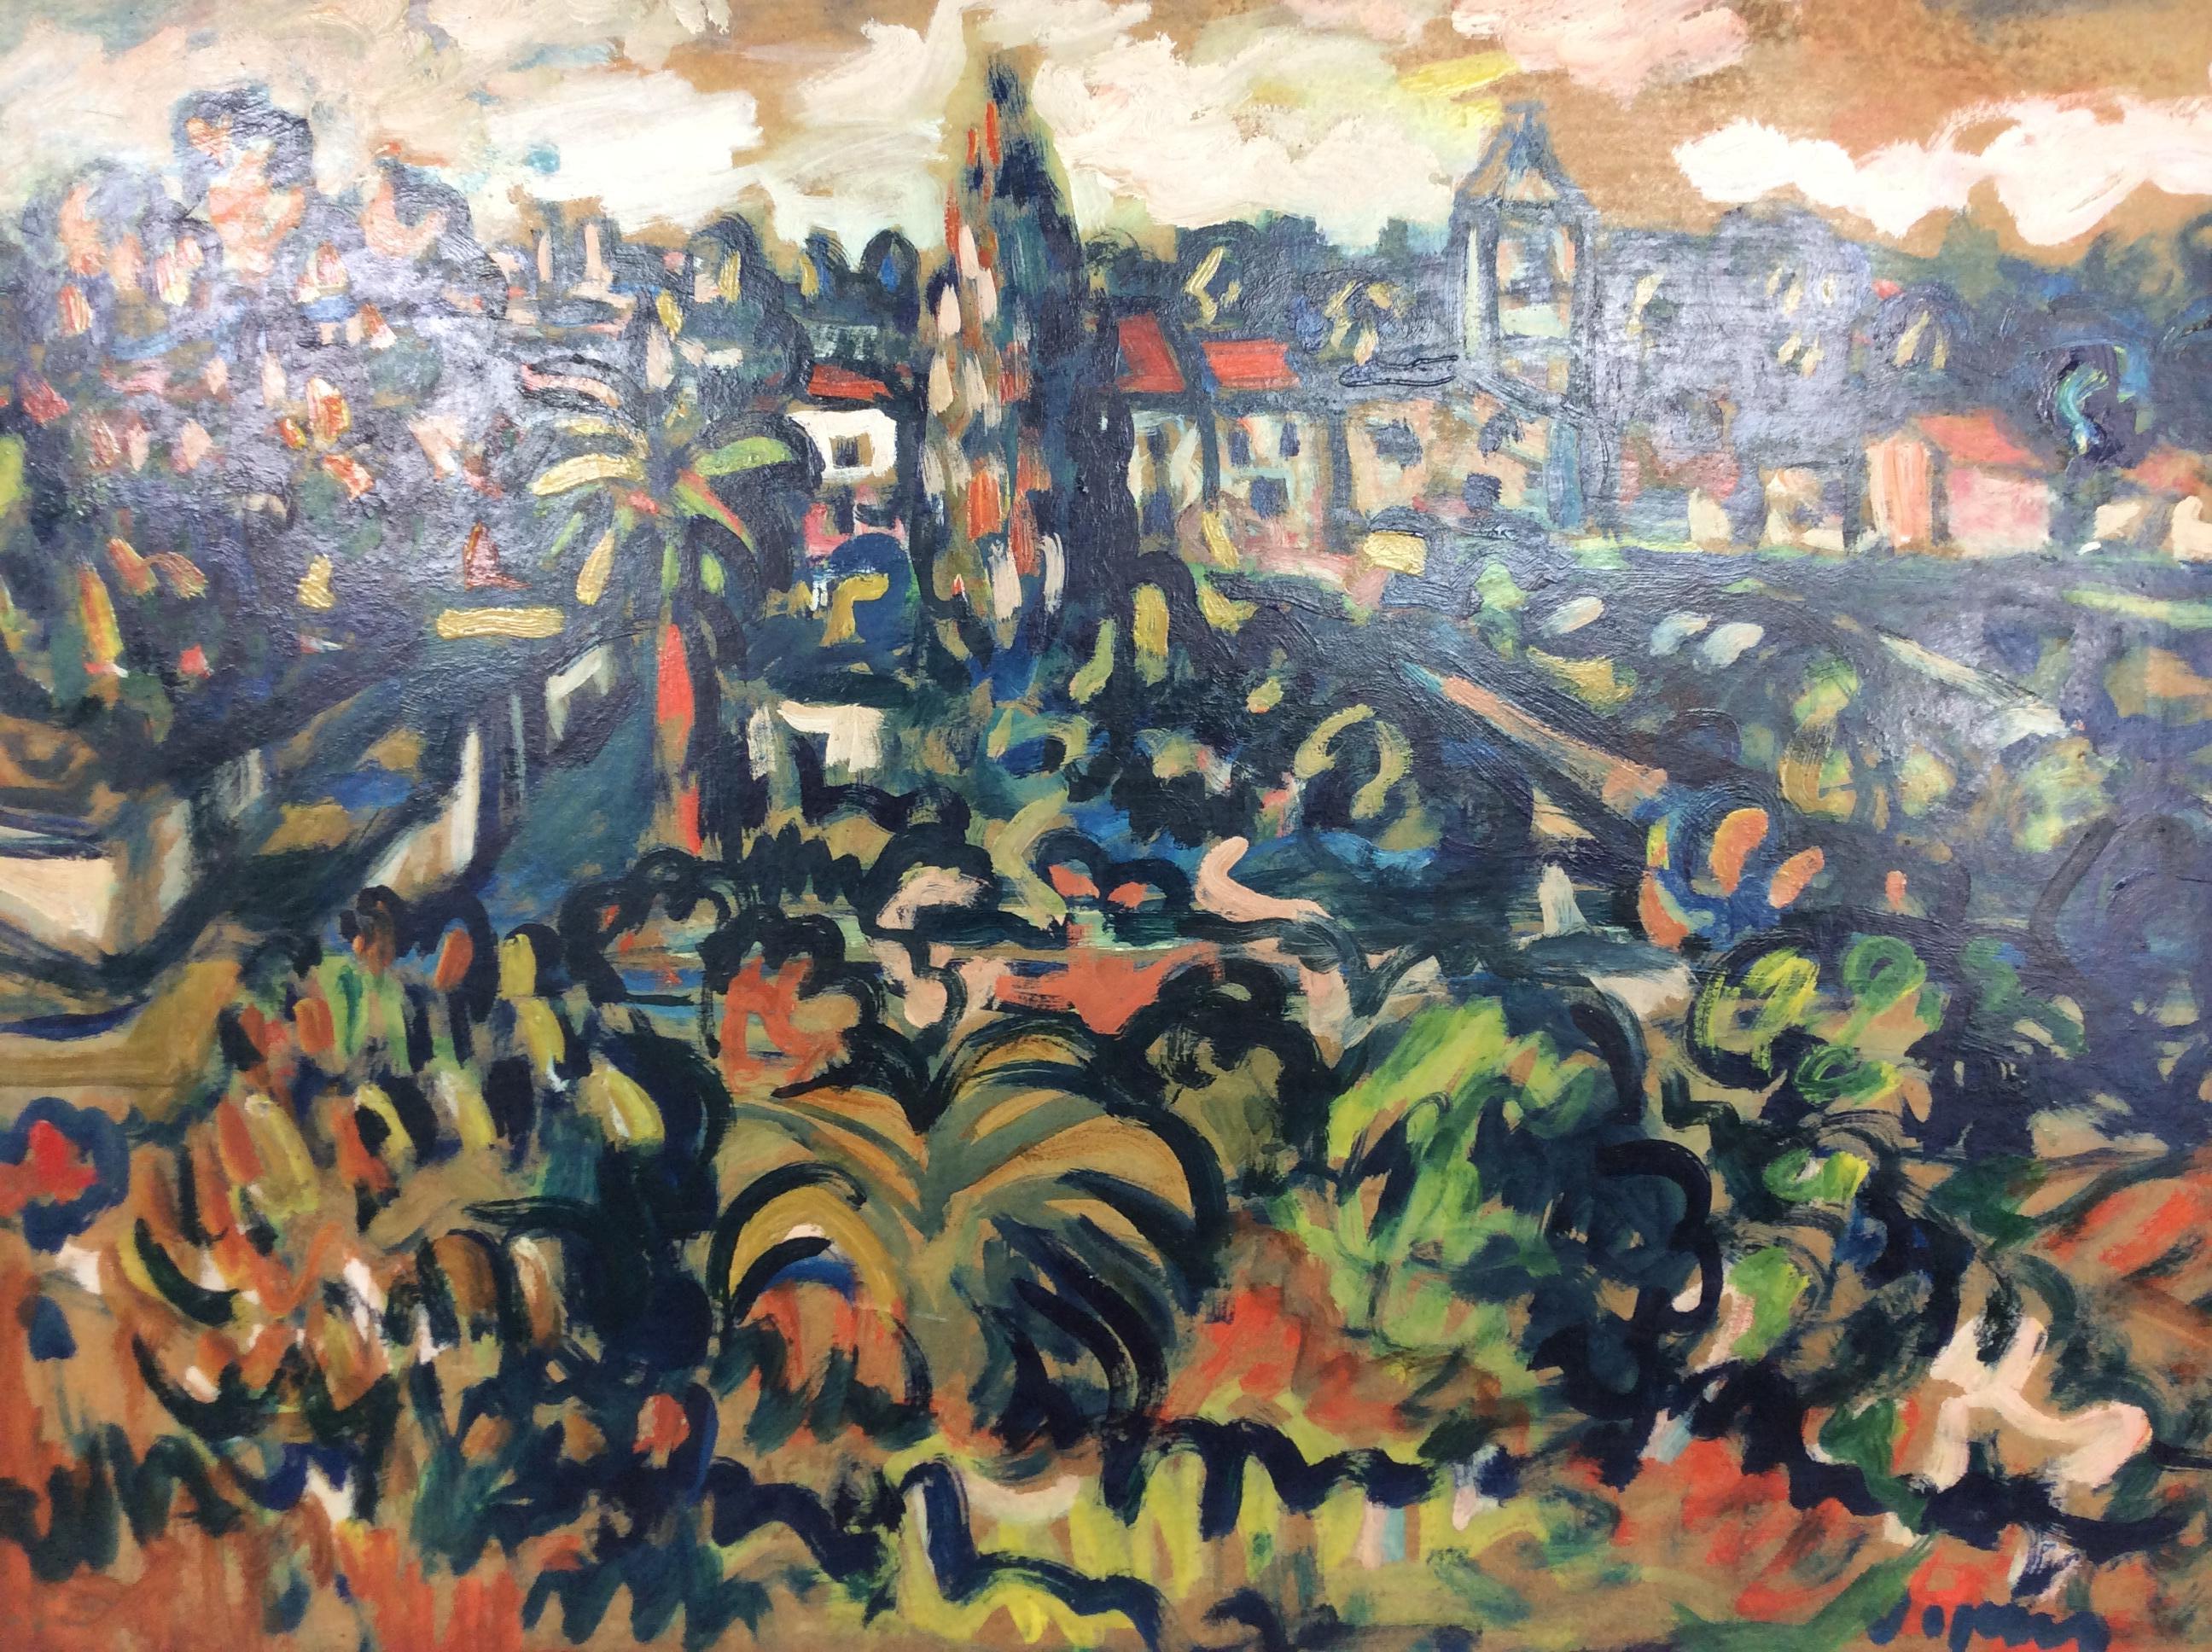 Sylvain Vigny Original French Post Impressionist Landscape Painting Oil on Board In Good Condition For Sale In Miami, FL